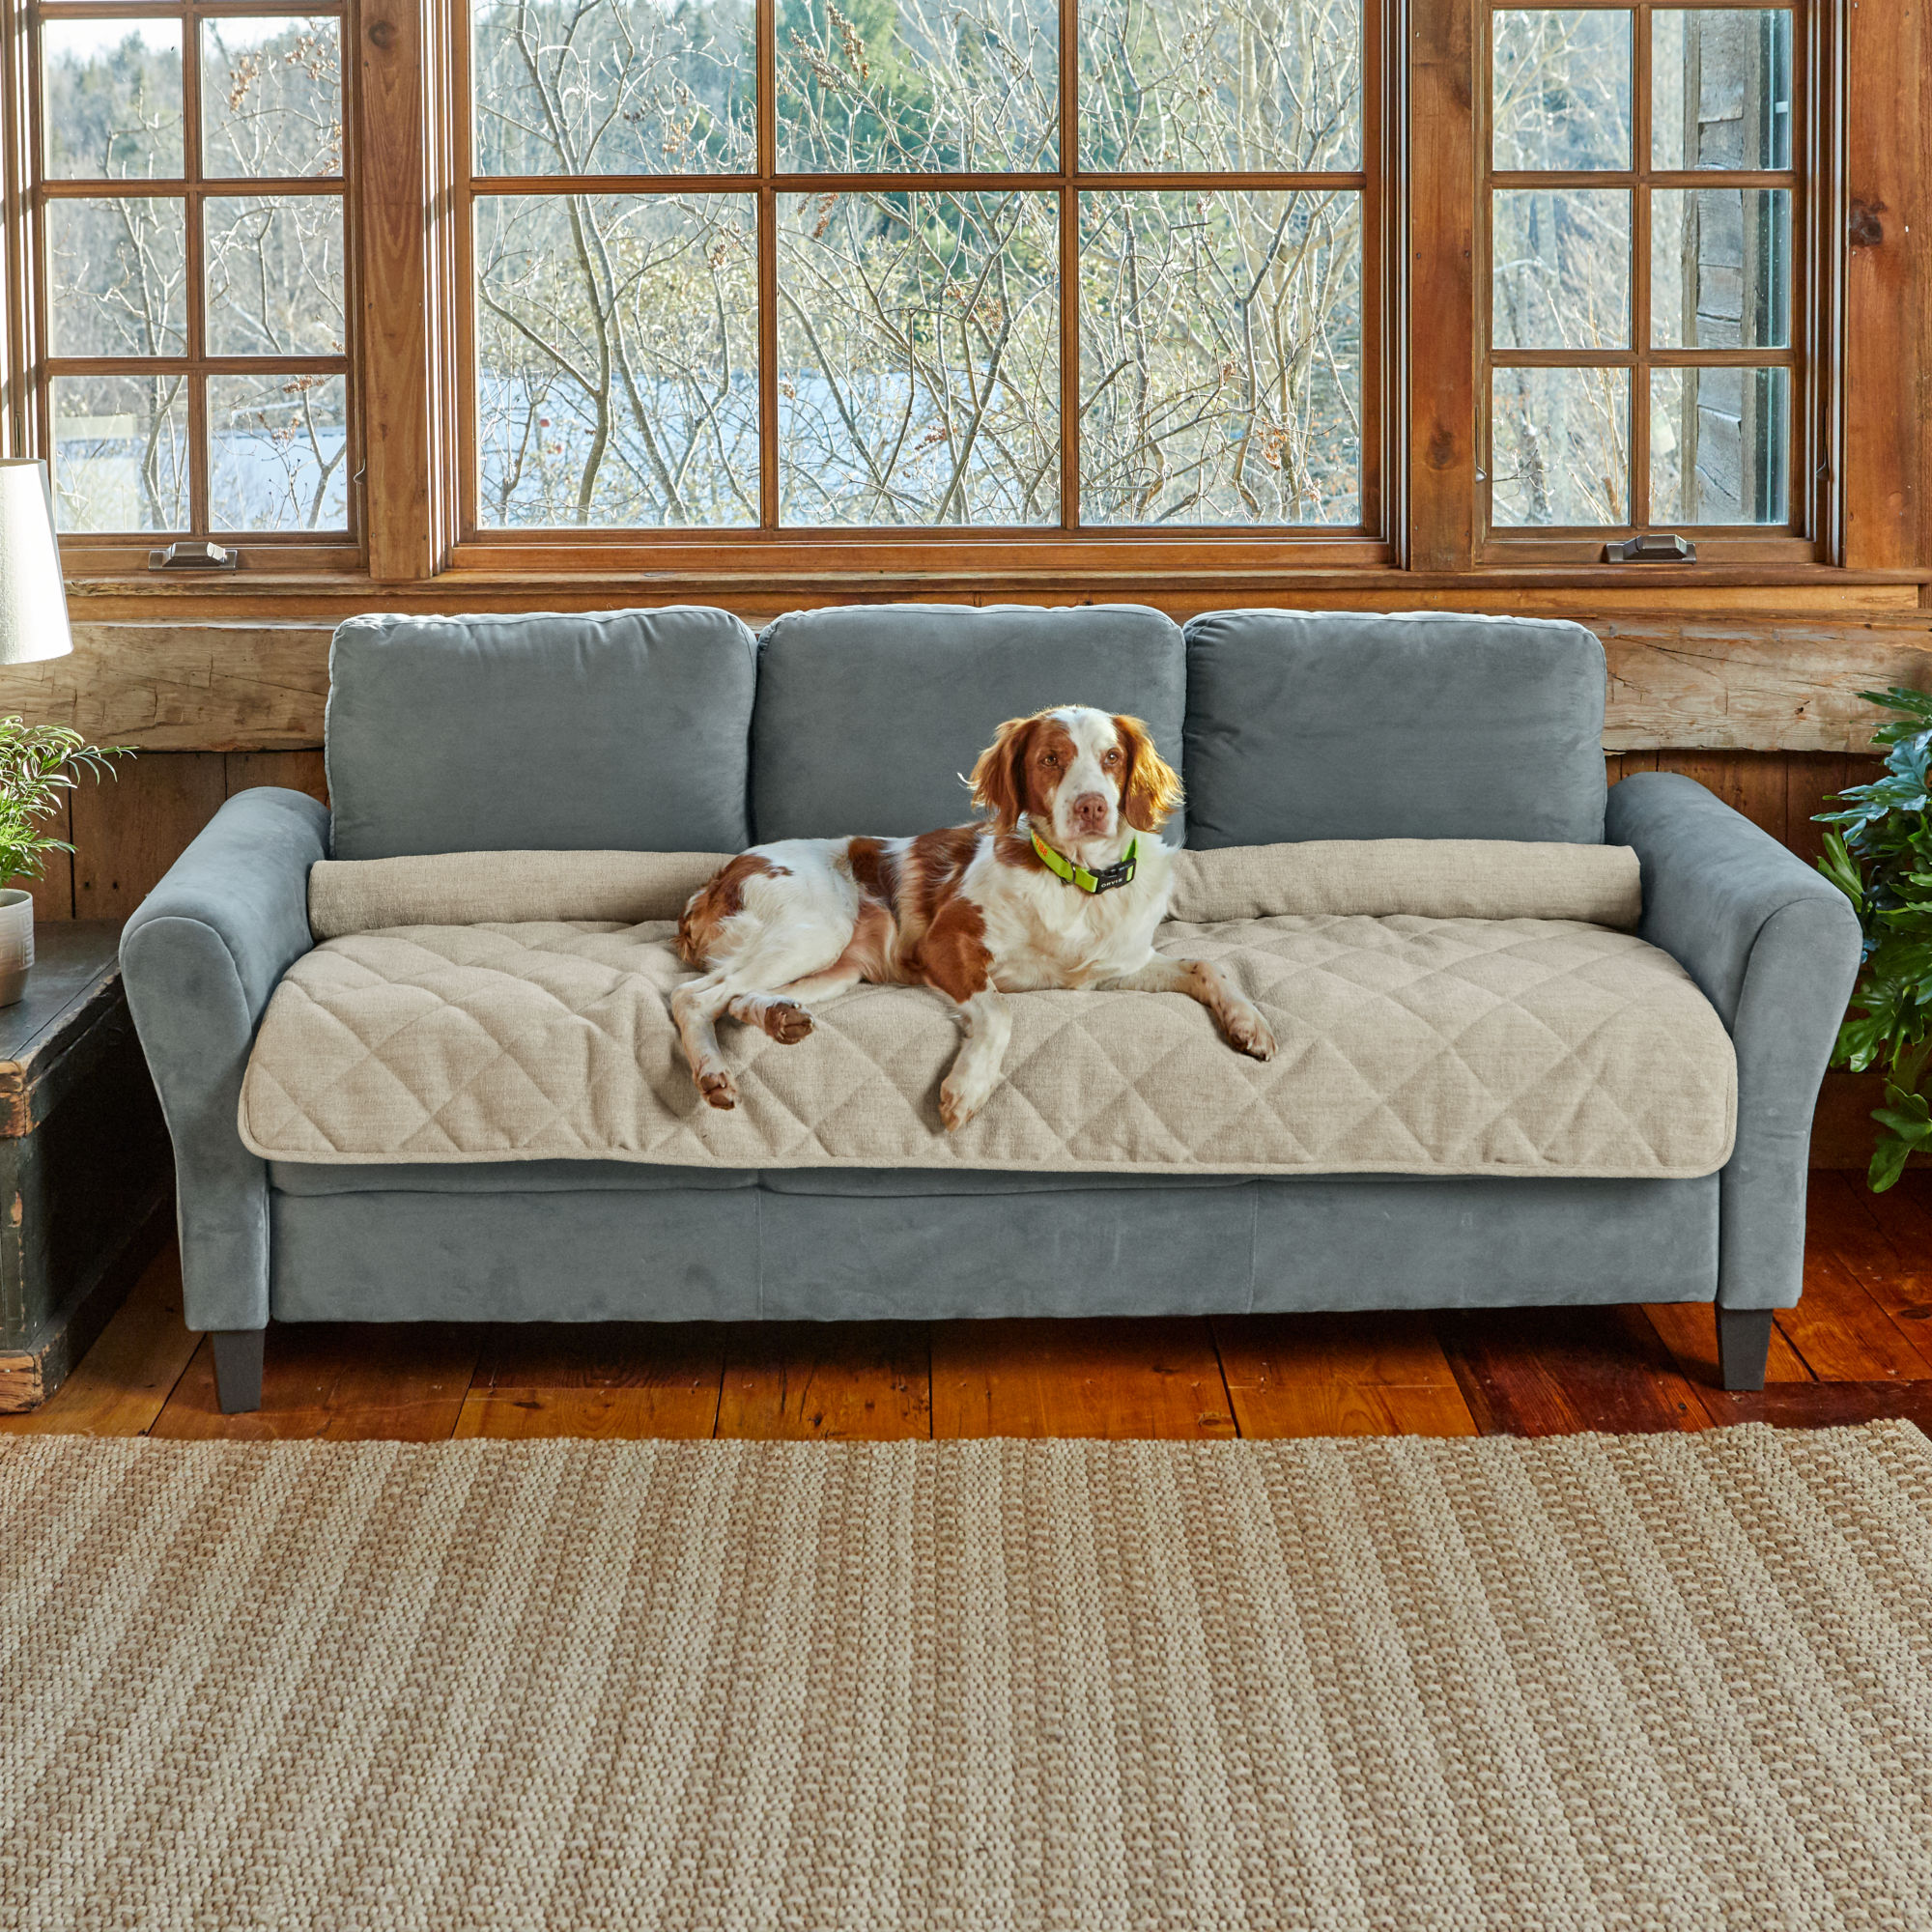 Beige, Loveseat-2 Pieces Granbest Stretch Sofa Slipcovers 3 Cushion Couch Covers Water-Repellent Pet Furniture Covers Dog Couch Protectors